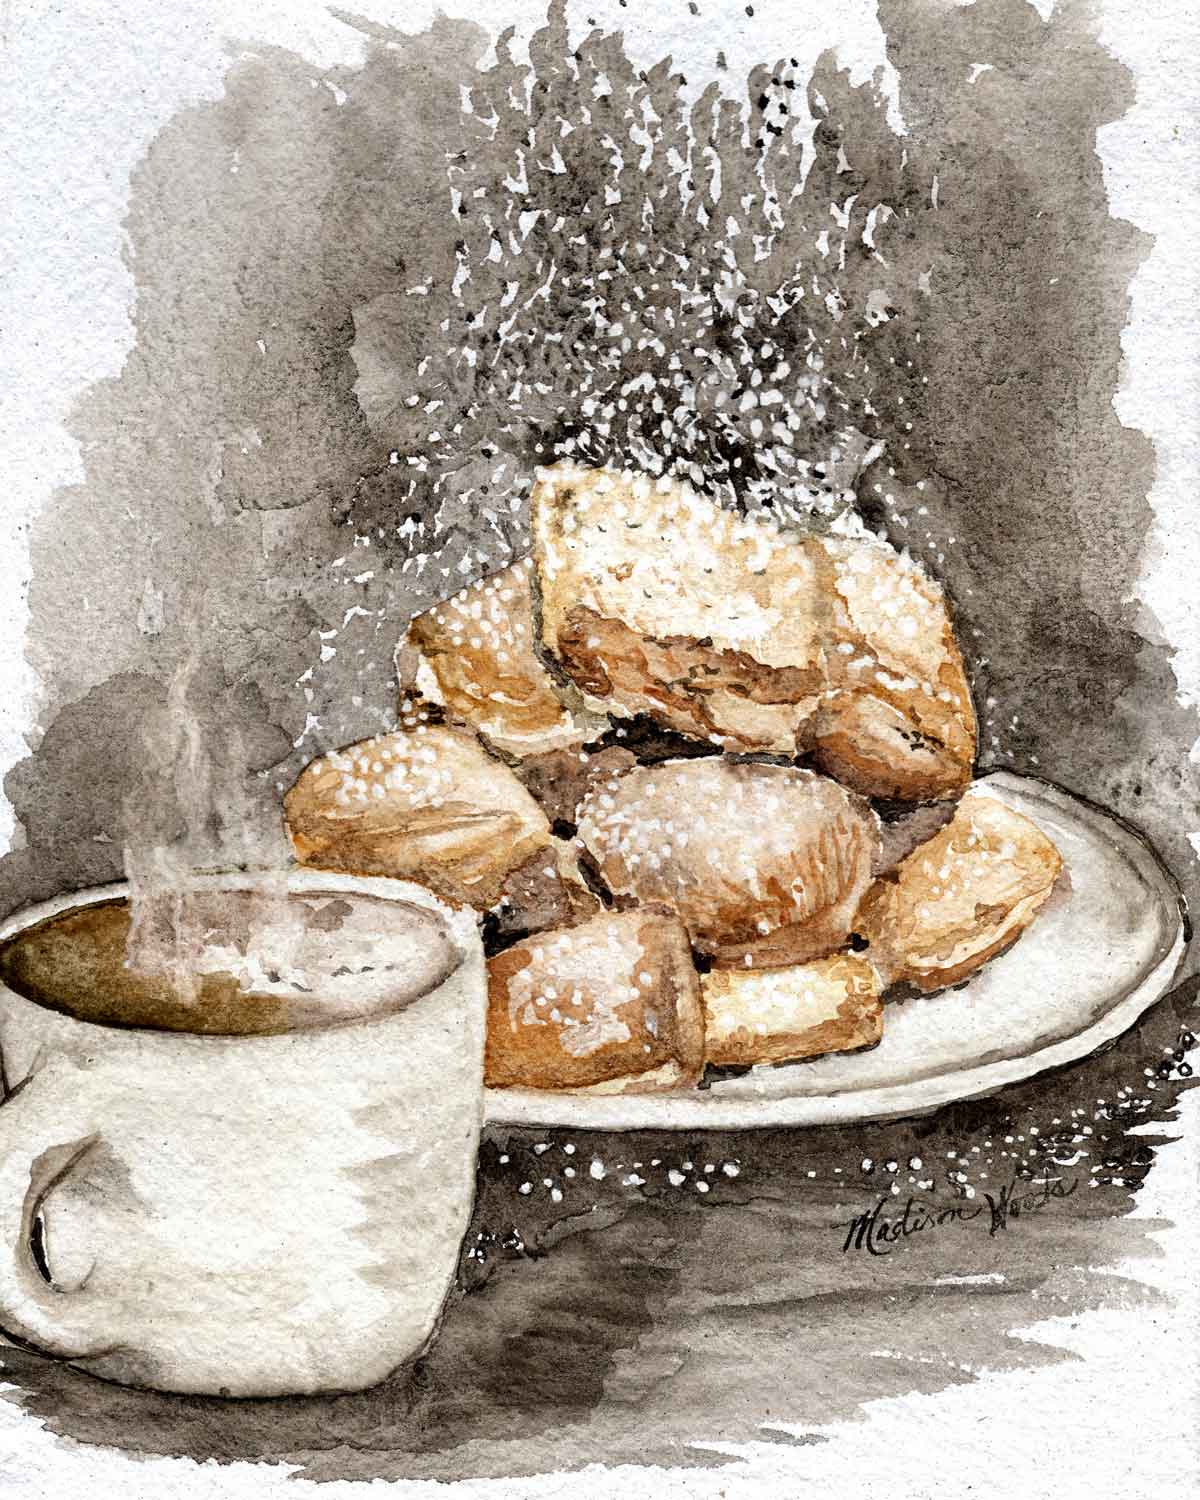 A plate of beignets and hot coffee.